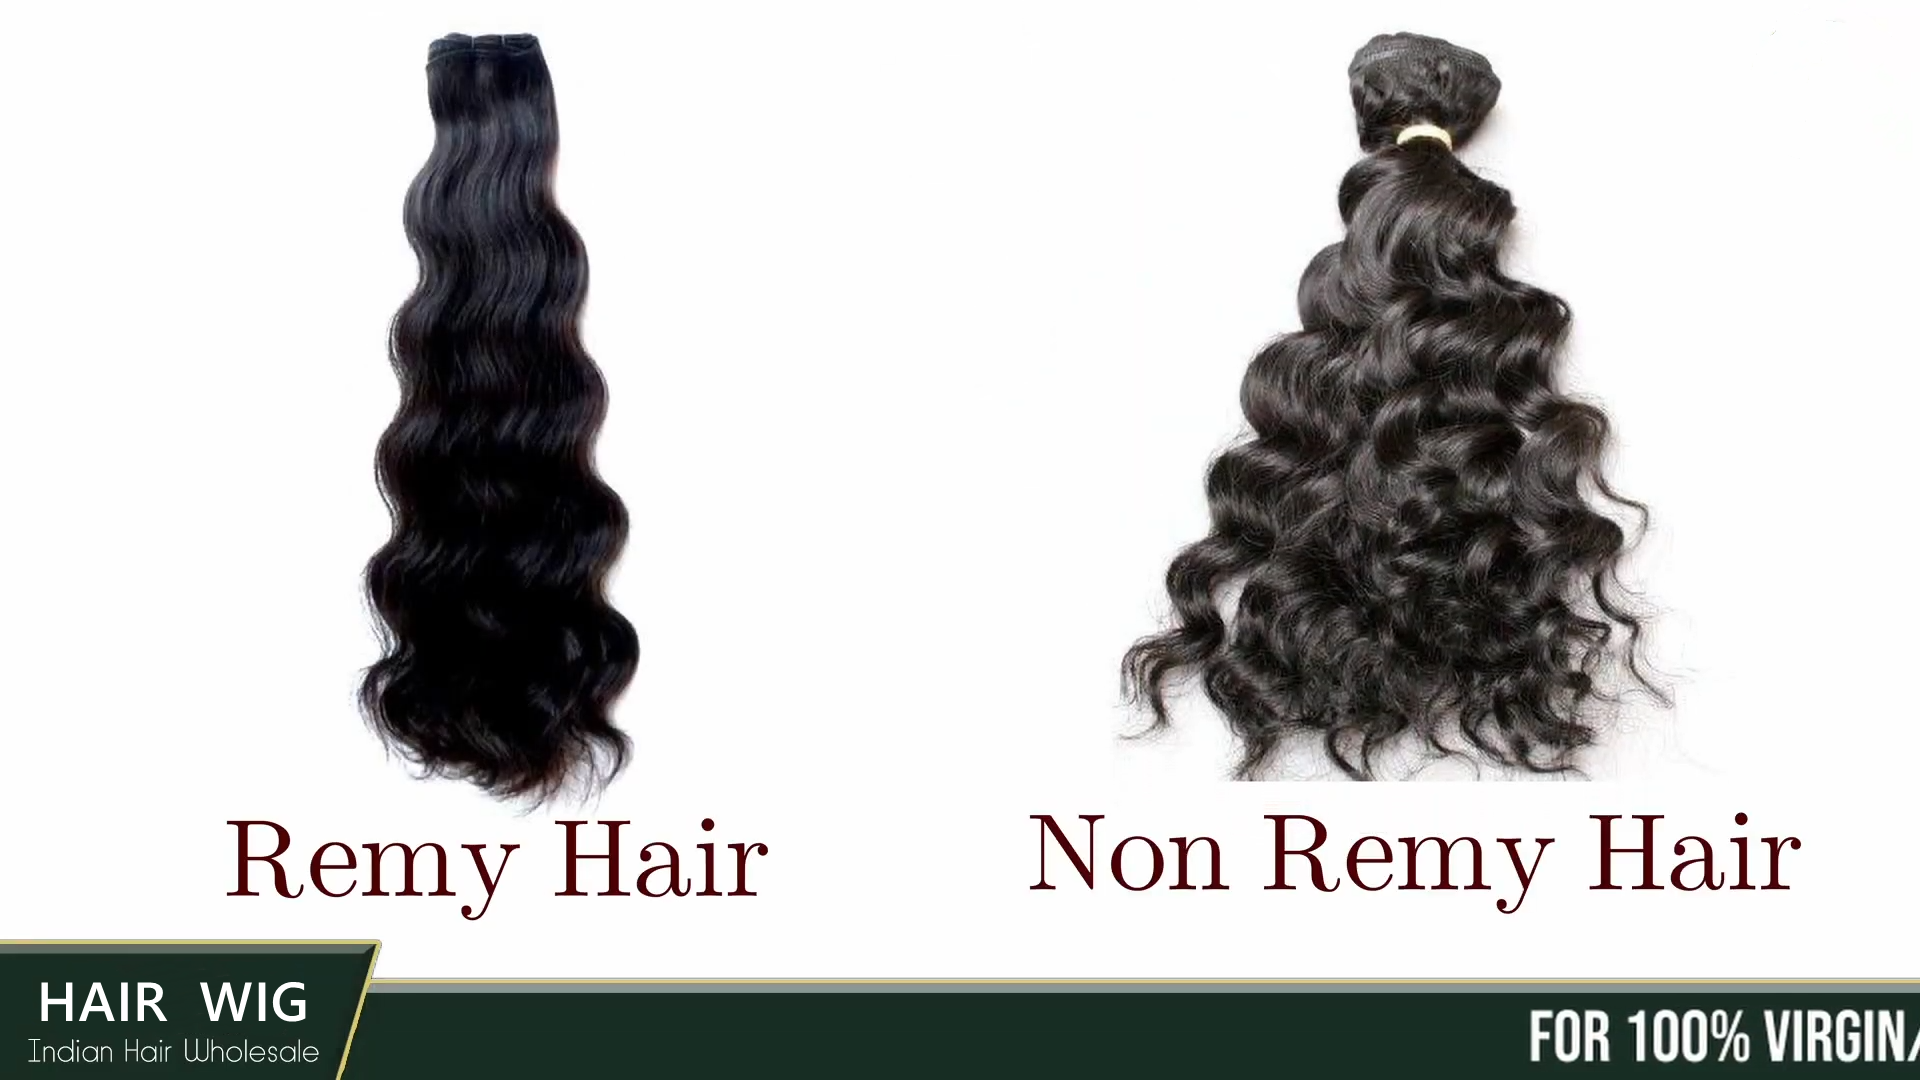 The Difference Between Remy And Non-Remy Hair